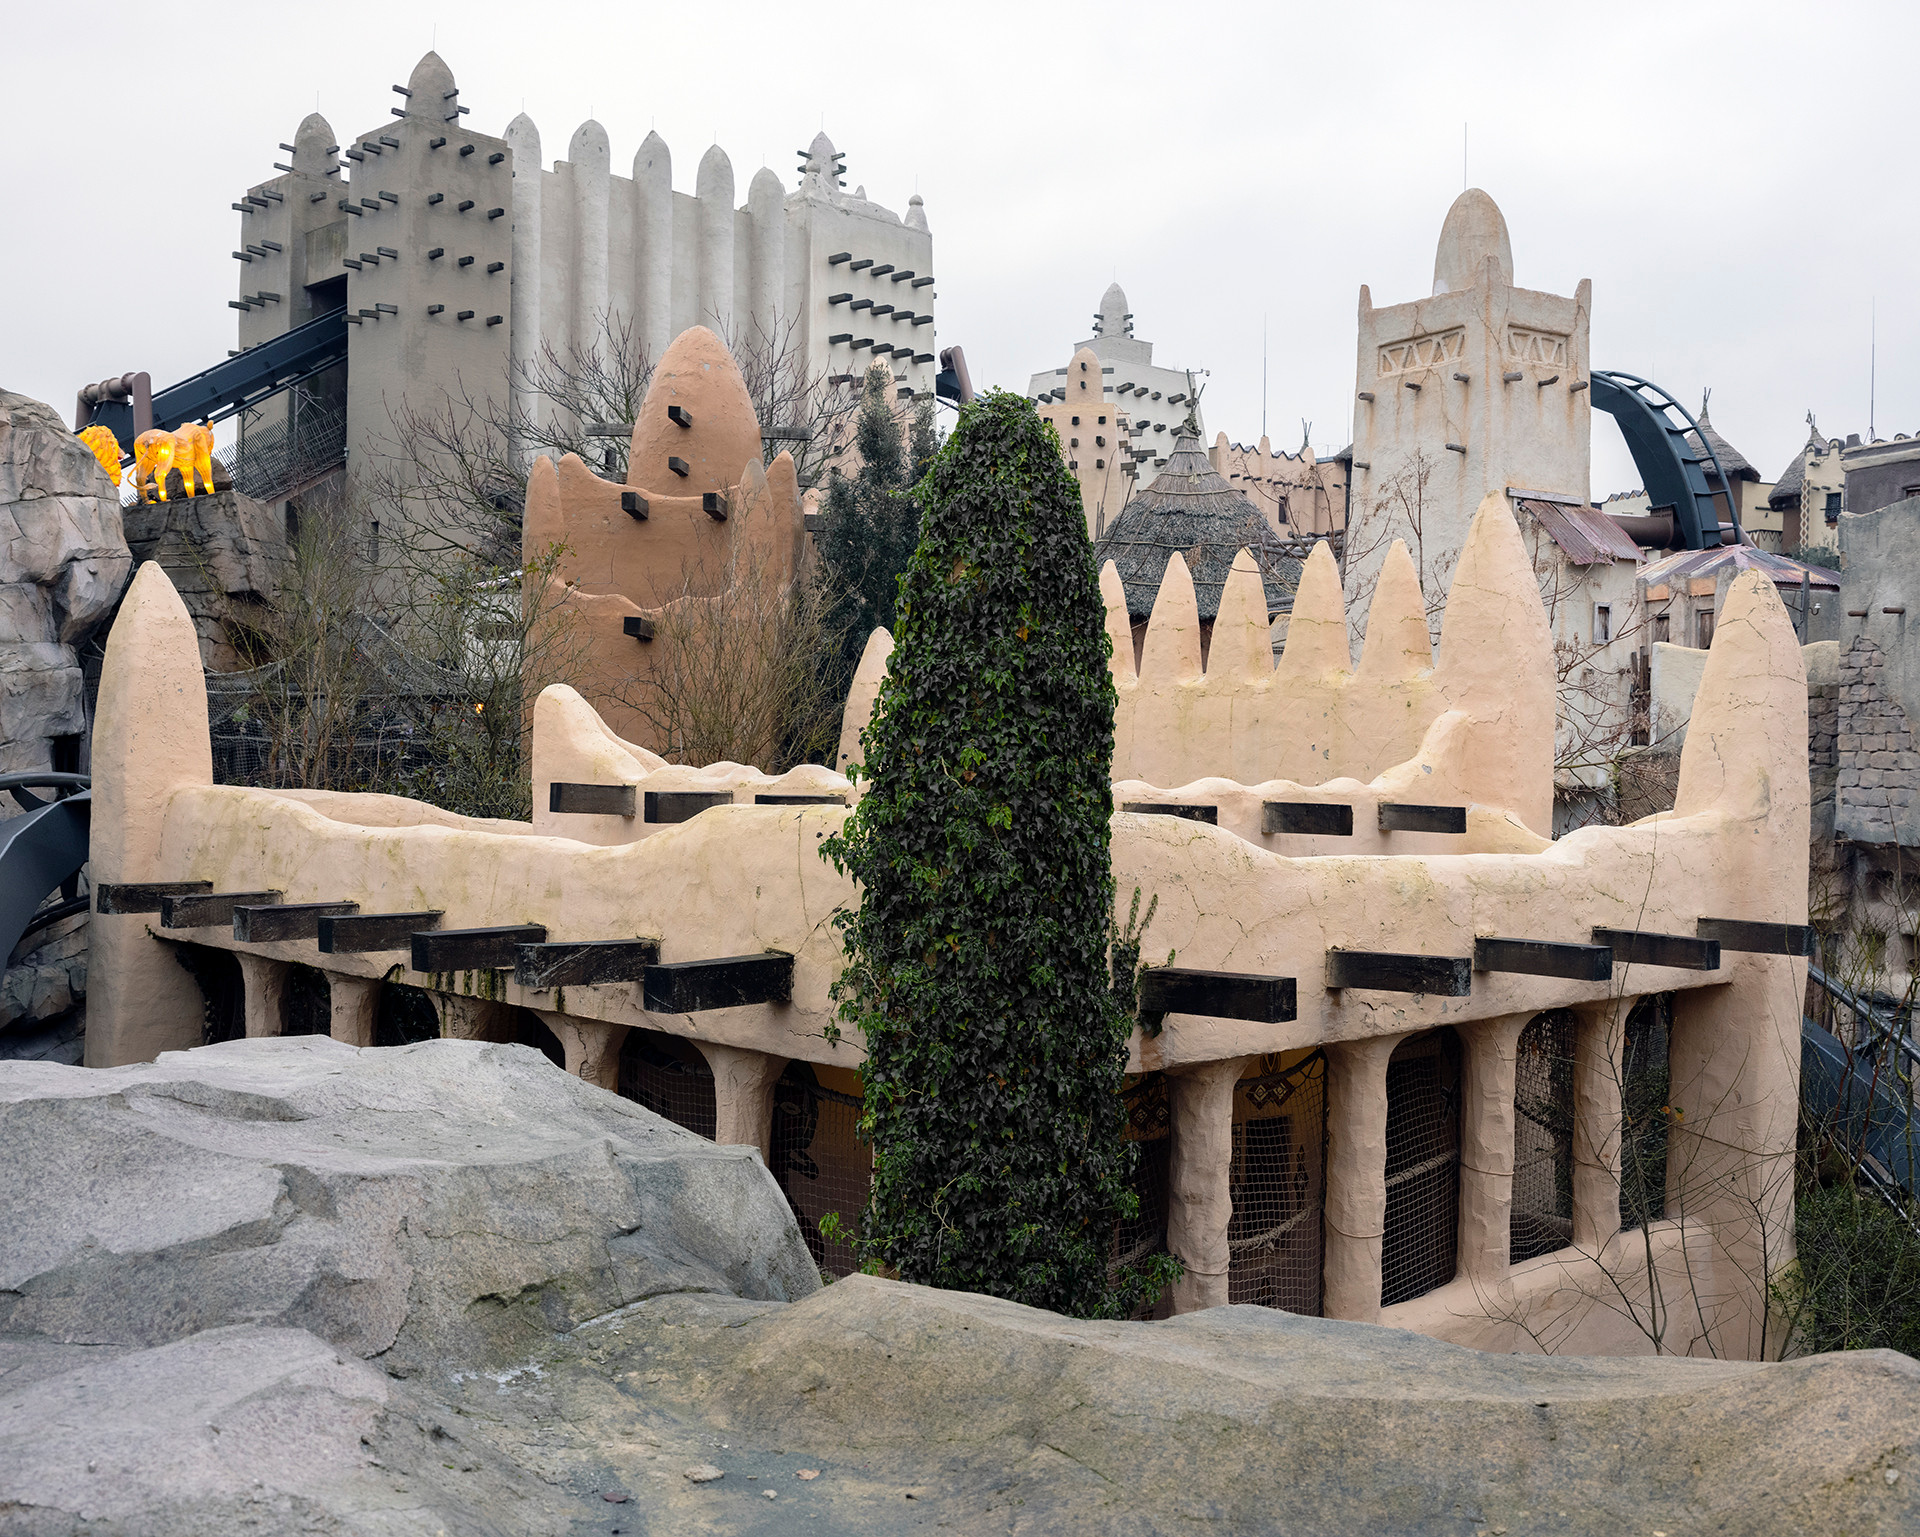 Deep in Africa: an attraction in Phantasialand, an amusement park near Cologne, Germany, modeled in part after the Great Mosque of Djenné, Mali